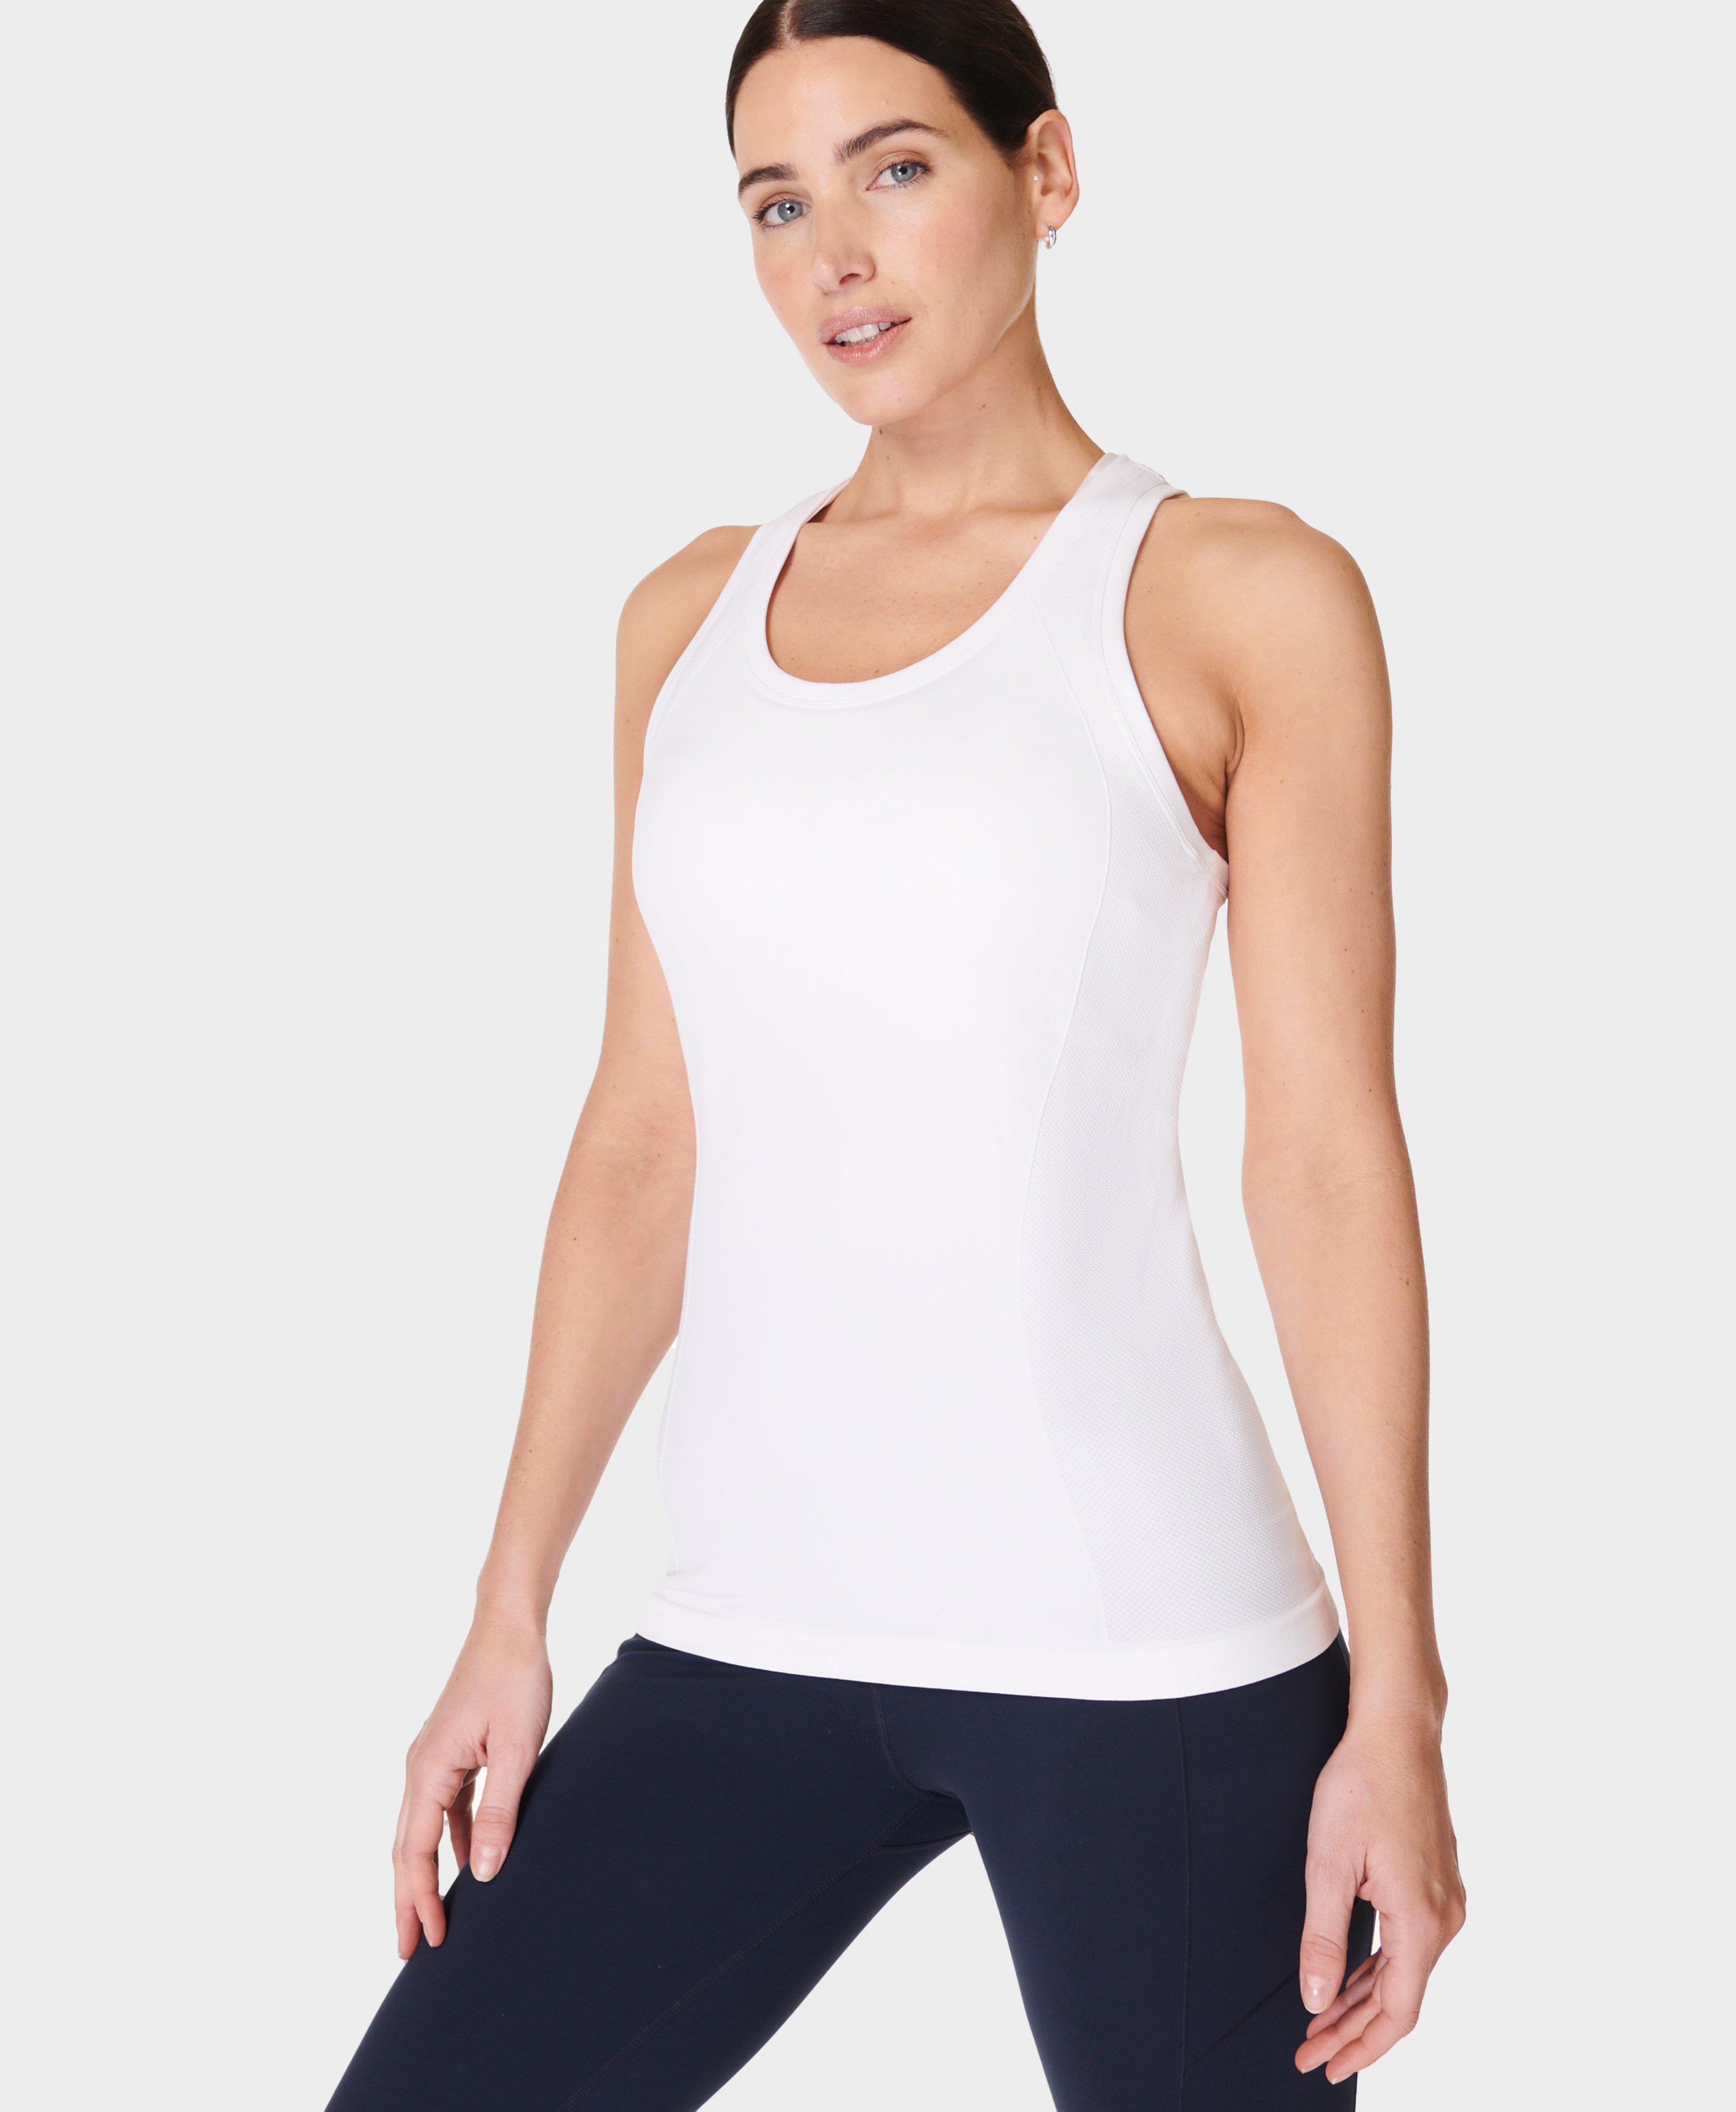 Sweaty Betty fashion − Browse 700+ best sellers from 9 stores